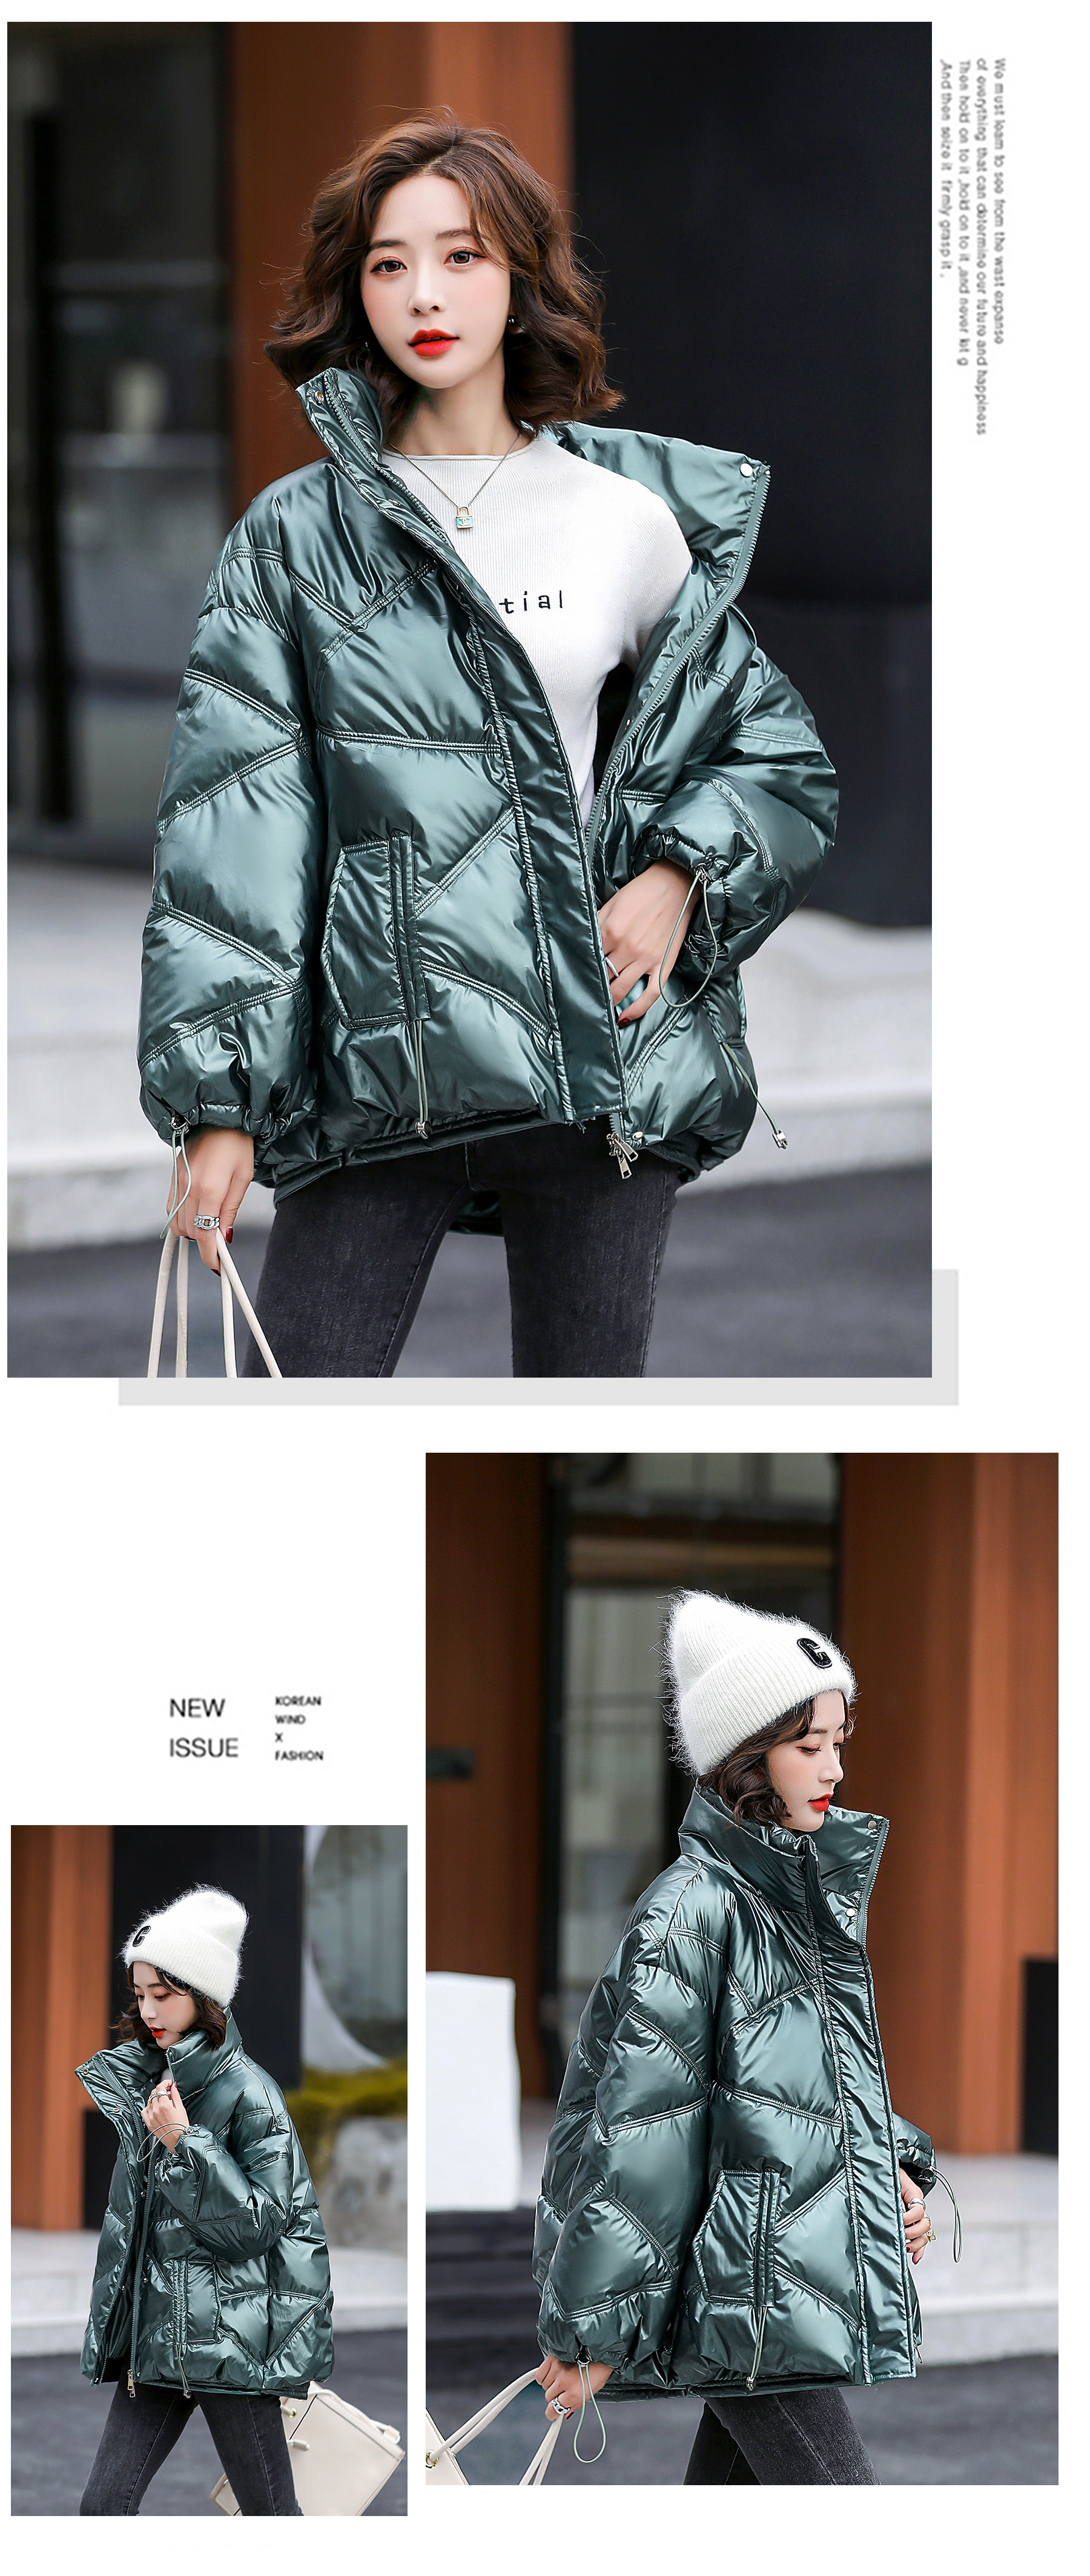 Women's Cropped Puffer Jacket Fashion Winter Outfit Coat13